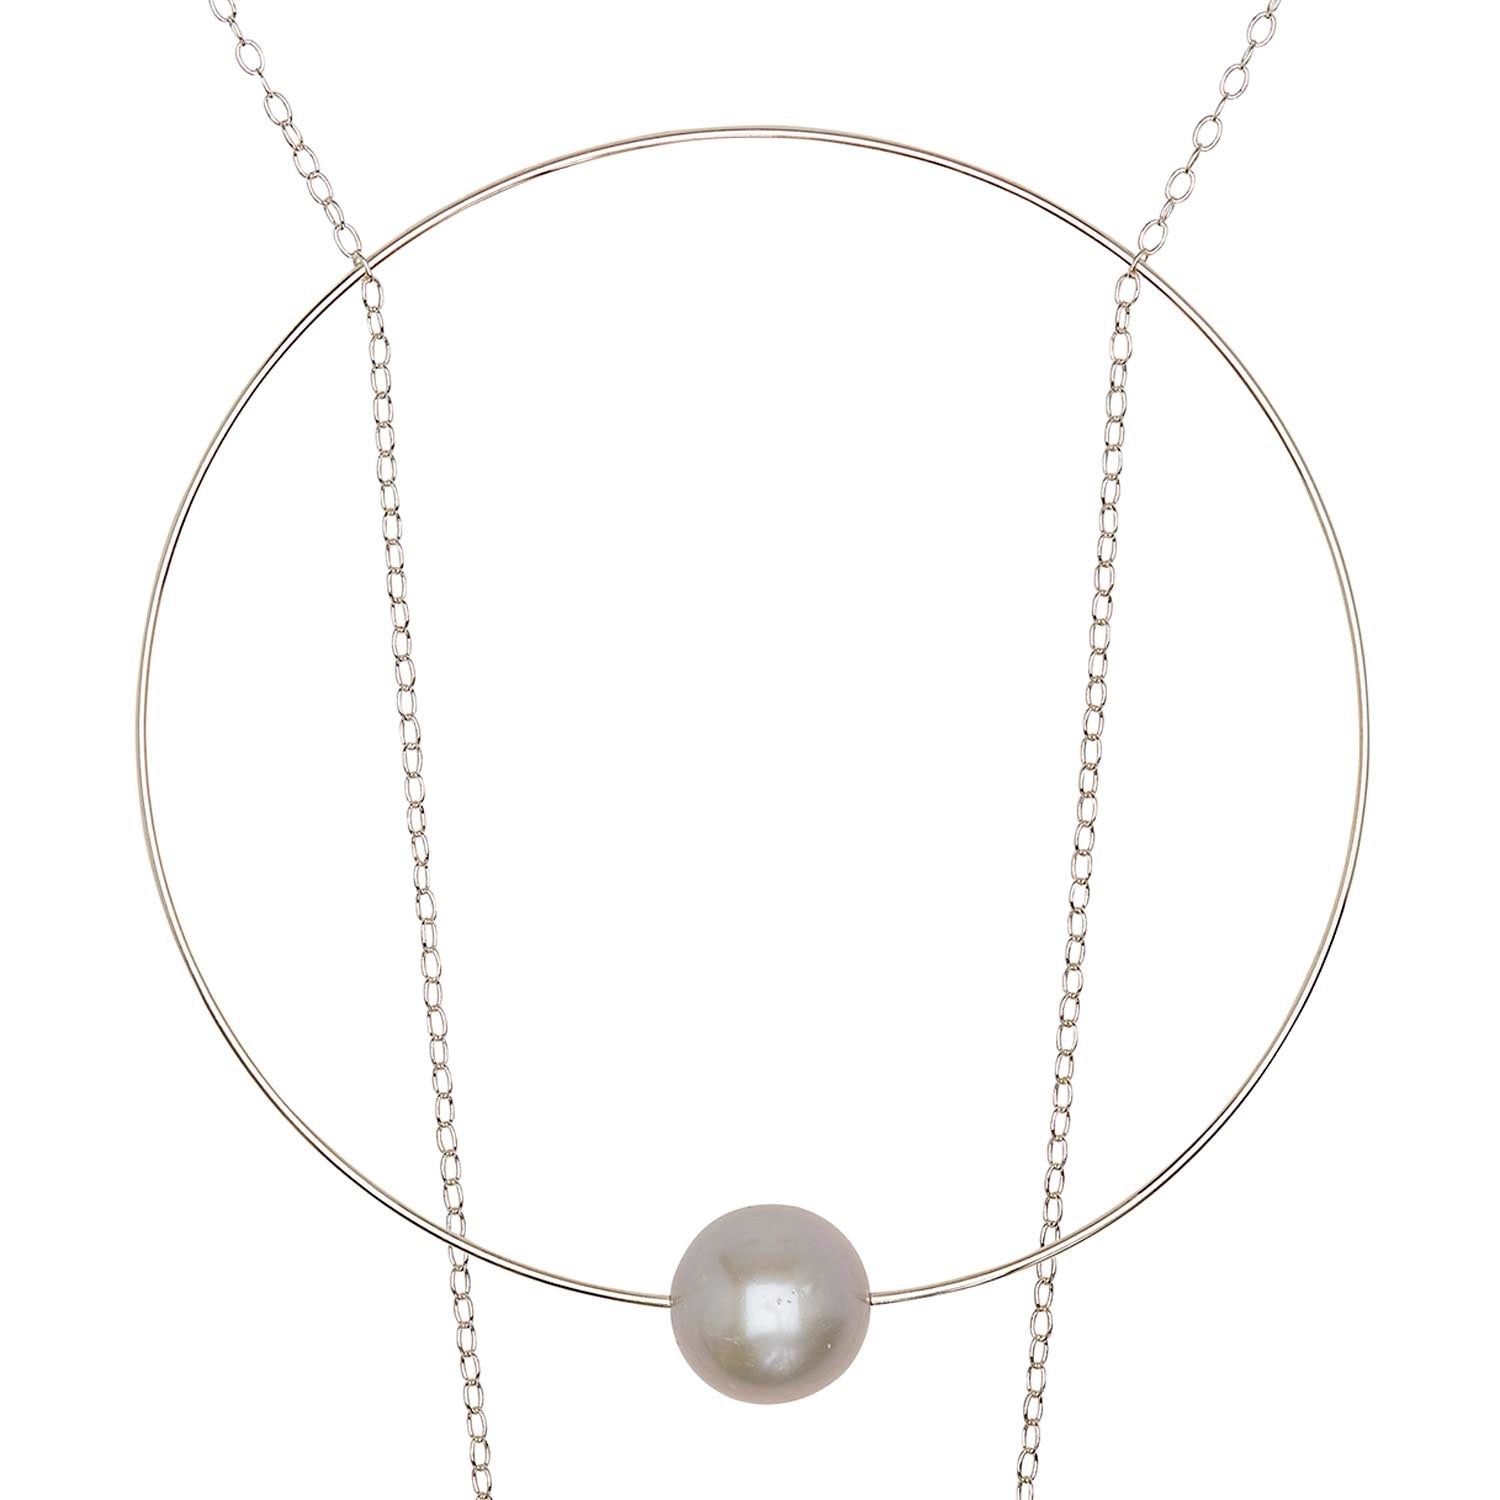 Large Circle Chain Pendant Necklace with Grey Pearl